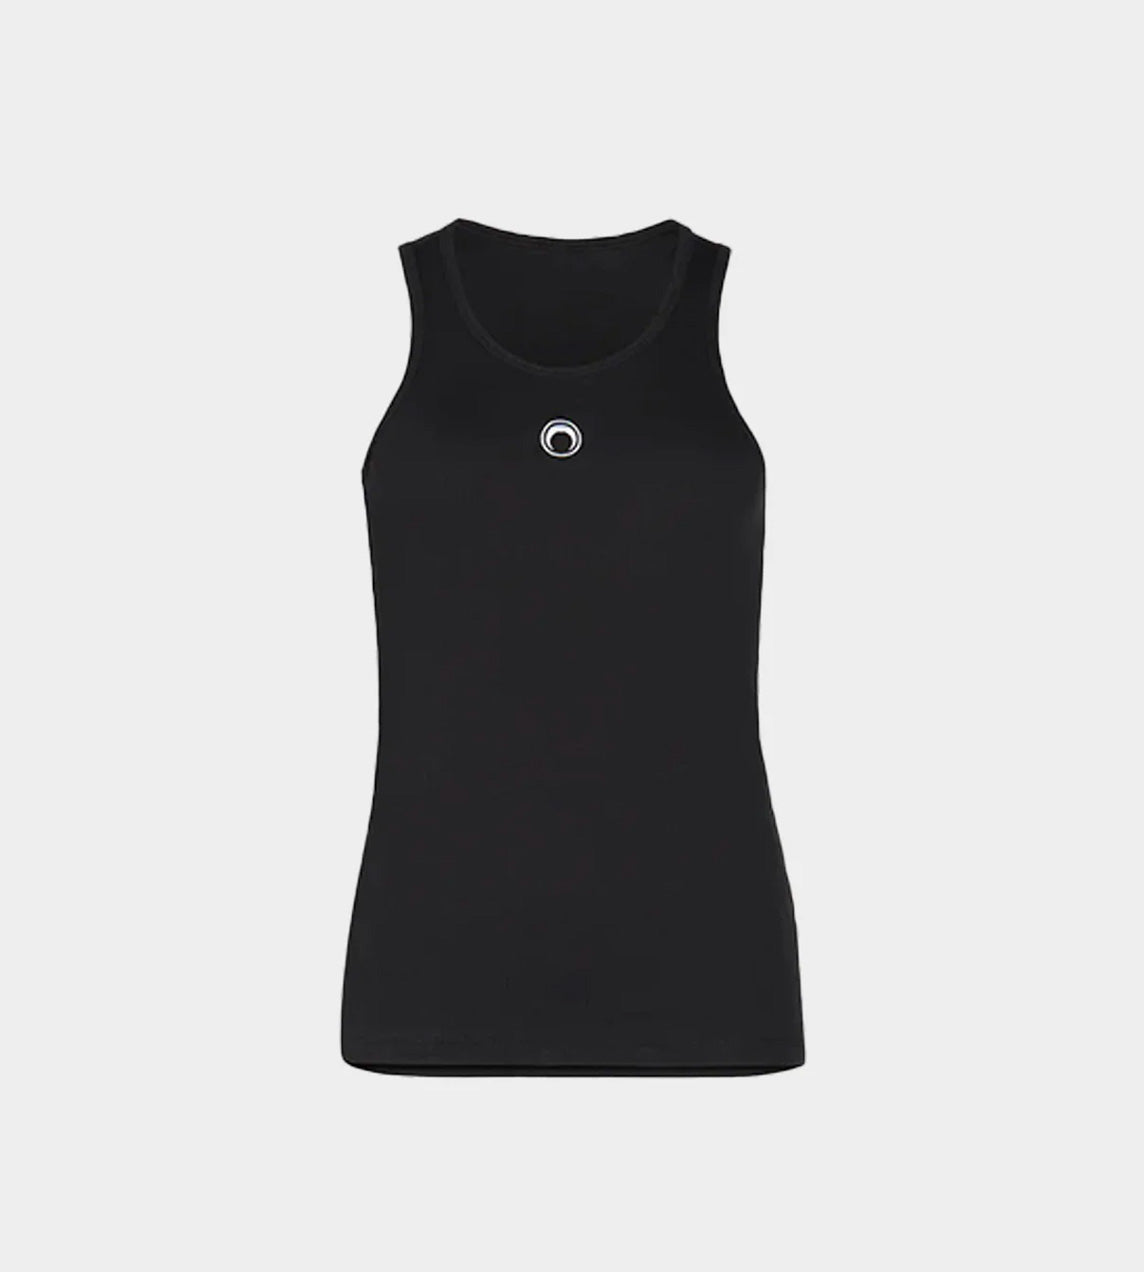 Marine Serre - Ribbed Tank with MoonMarine Serre -Fitted Cotton Tank Black (M)